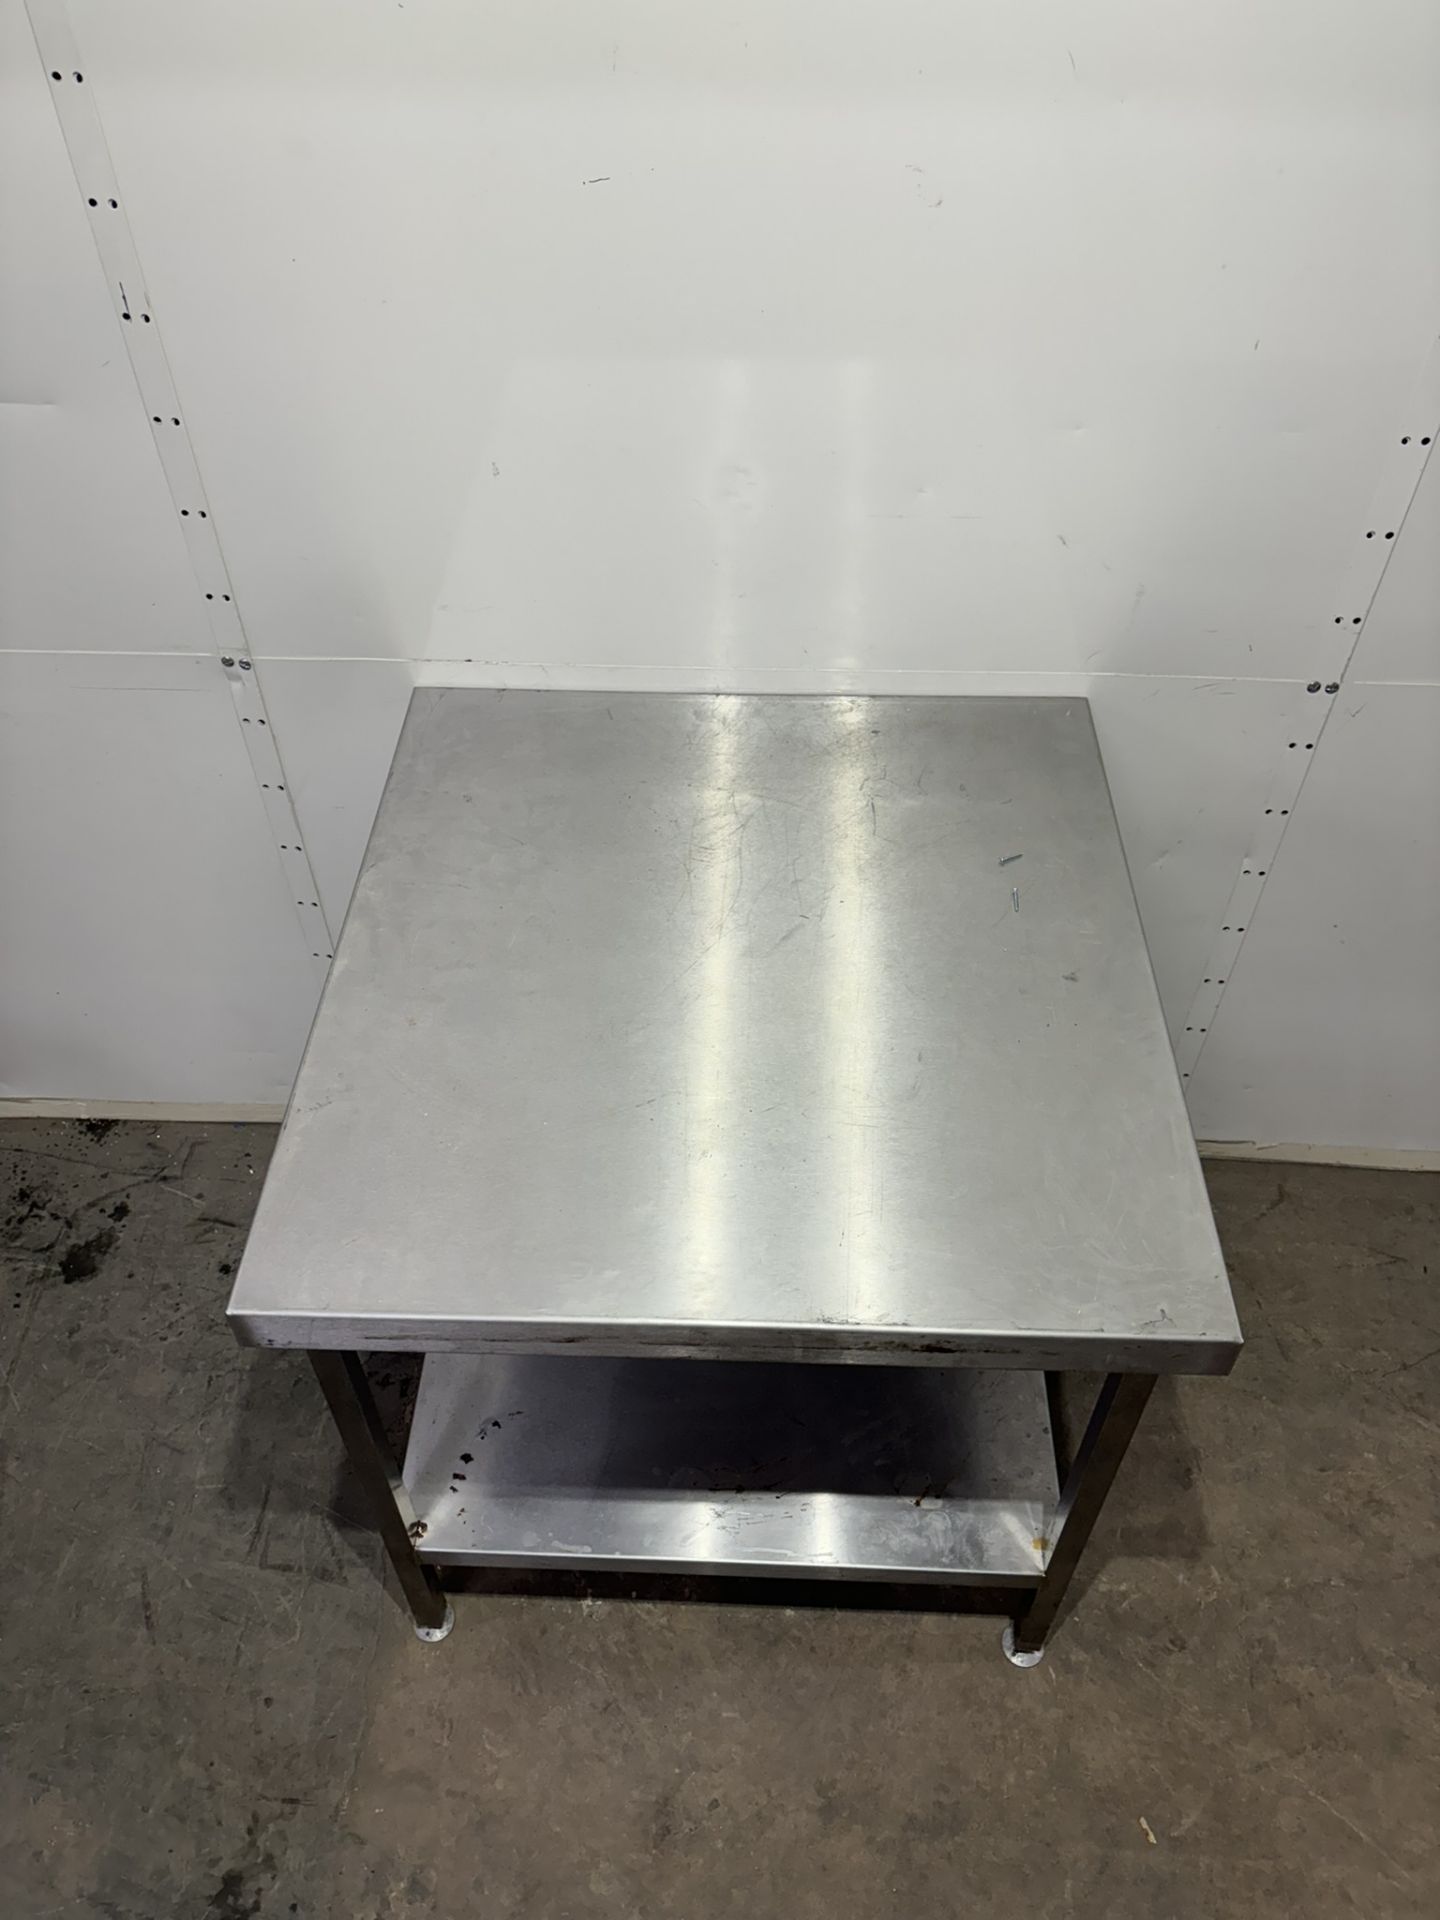 Commercial Stainless Steel Catering Preperation Table - Image 2 of 3